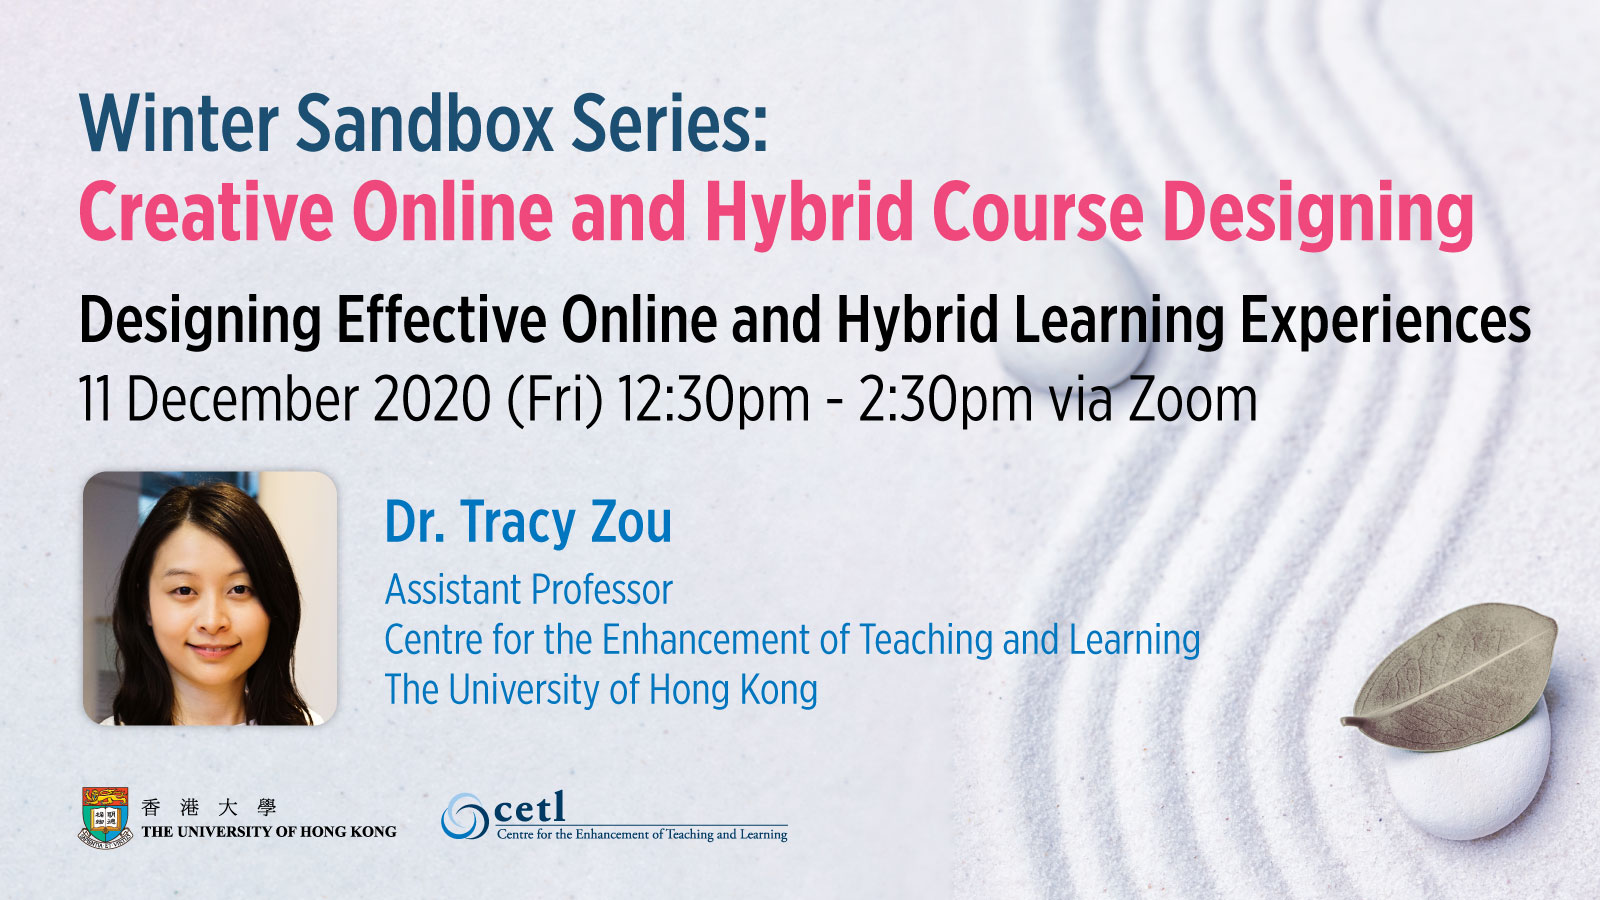 Session 1 : Designing effective online and hybrid learning experiences